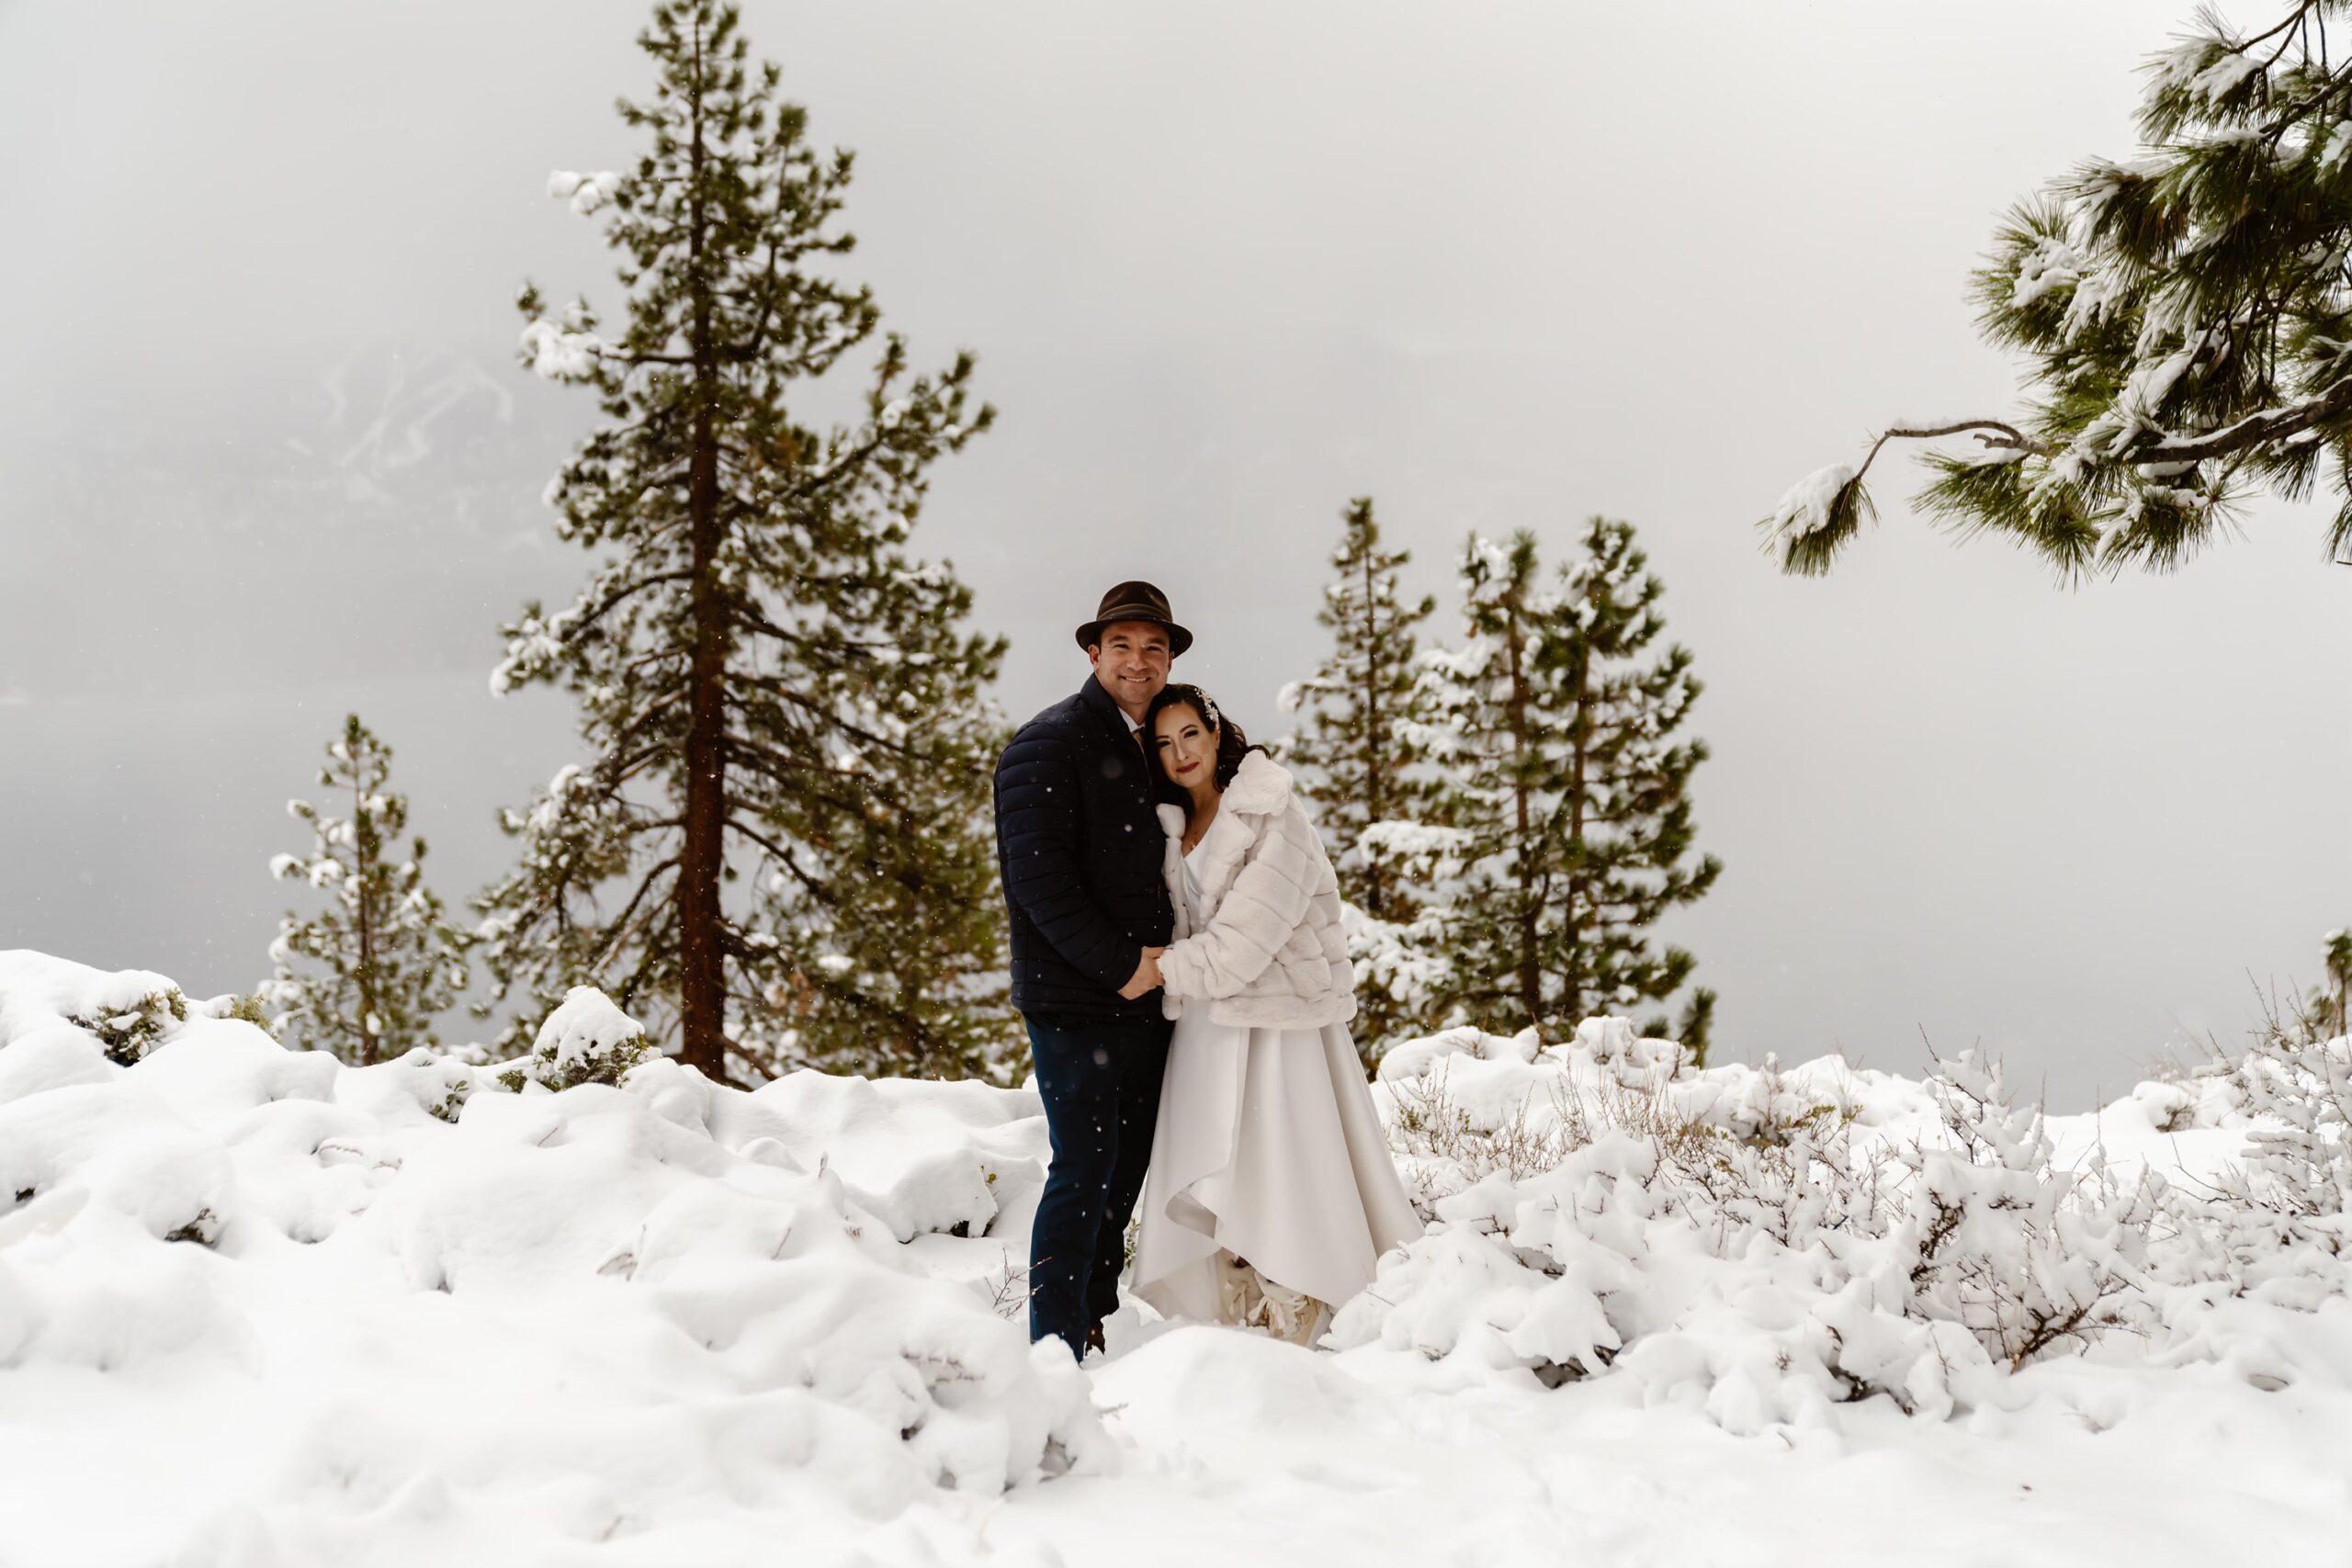 Bride and groom smile at camera during snowy mountain elopement